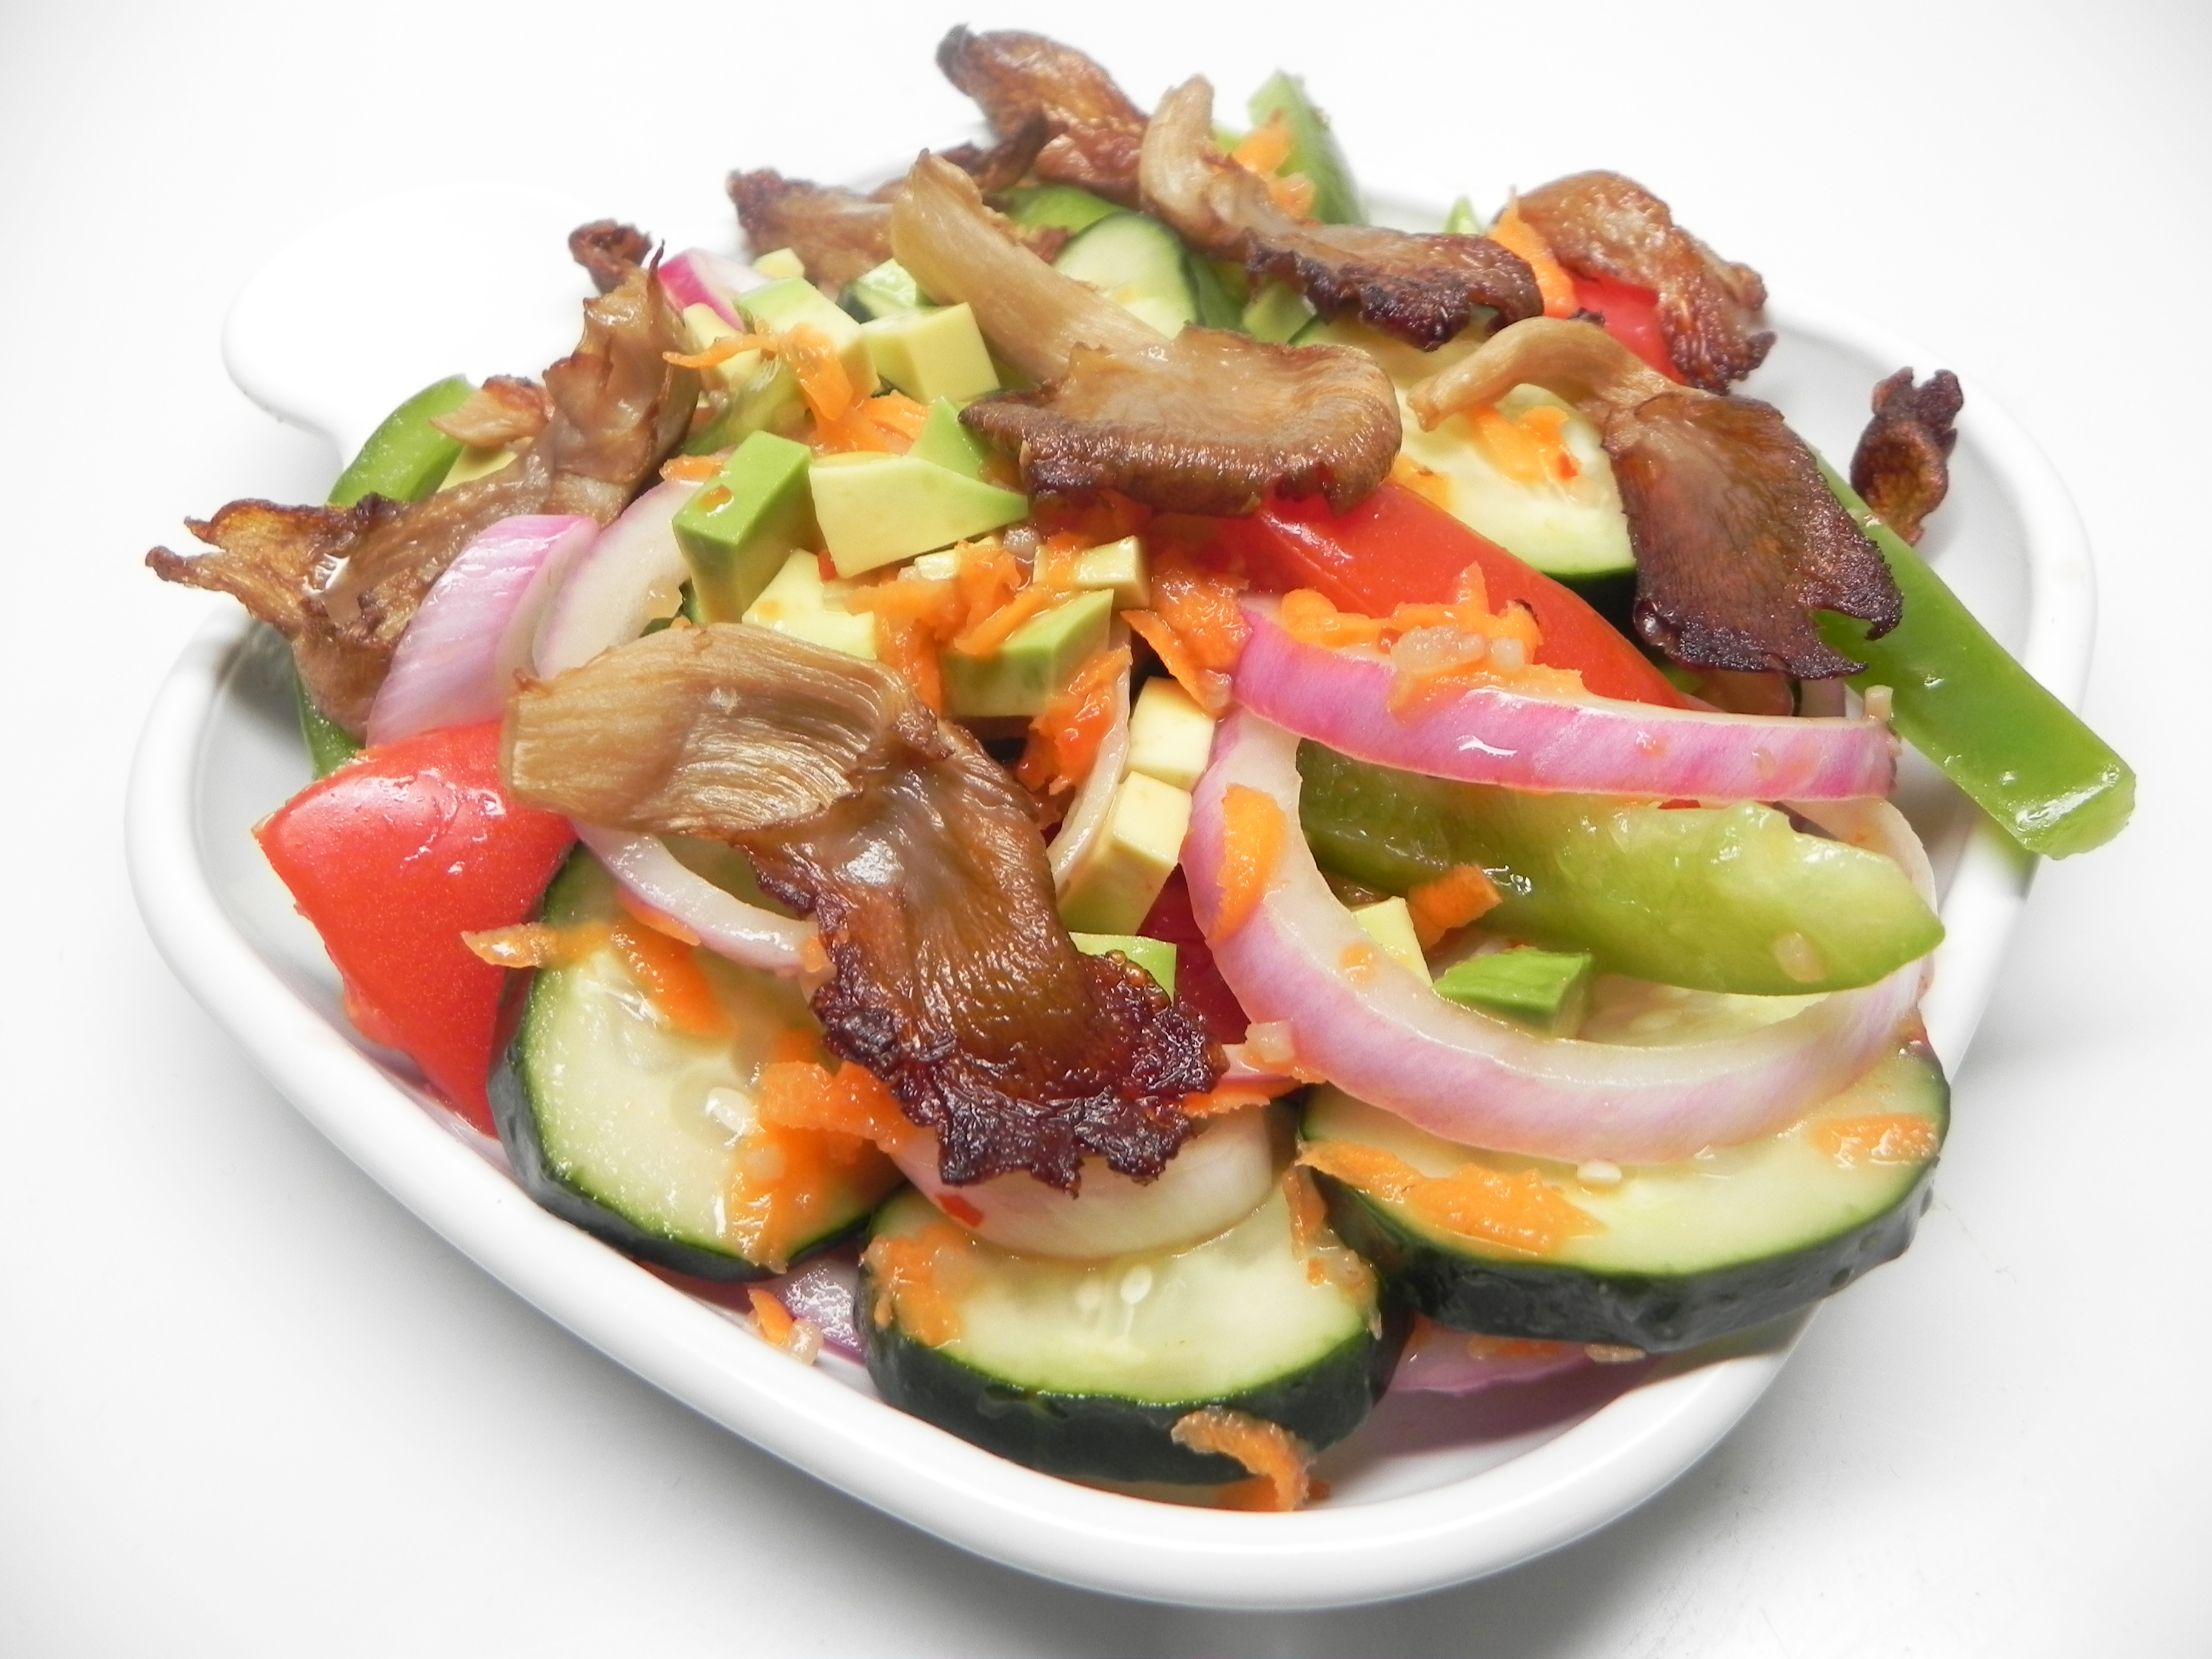 Refreshing Salad with Grilled Oyster Mushrooms